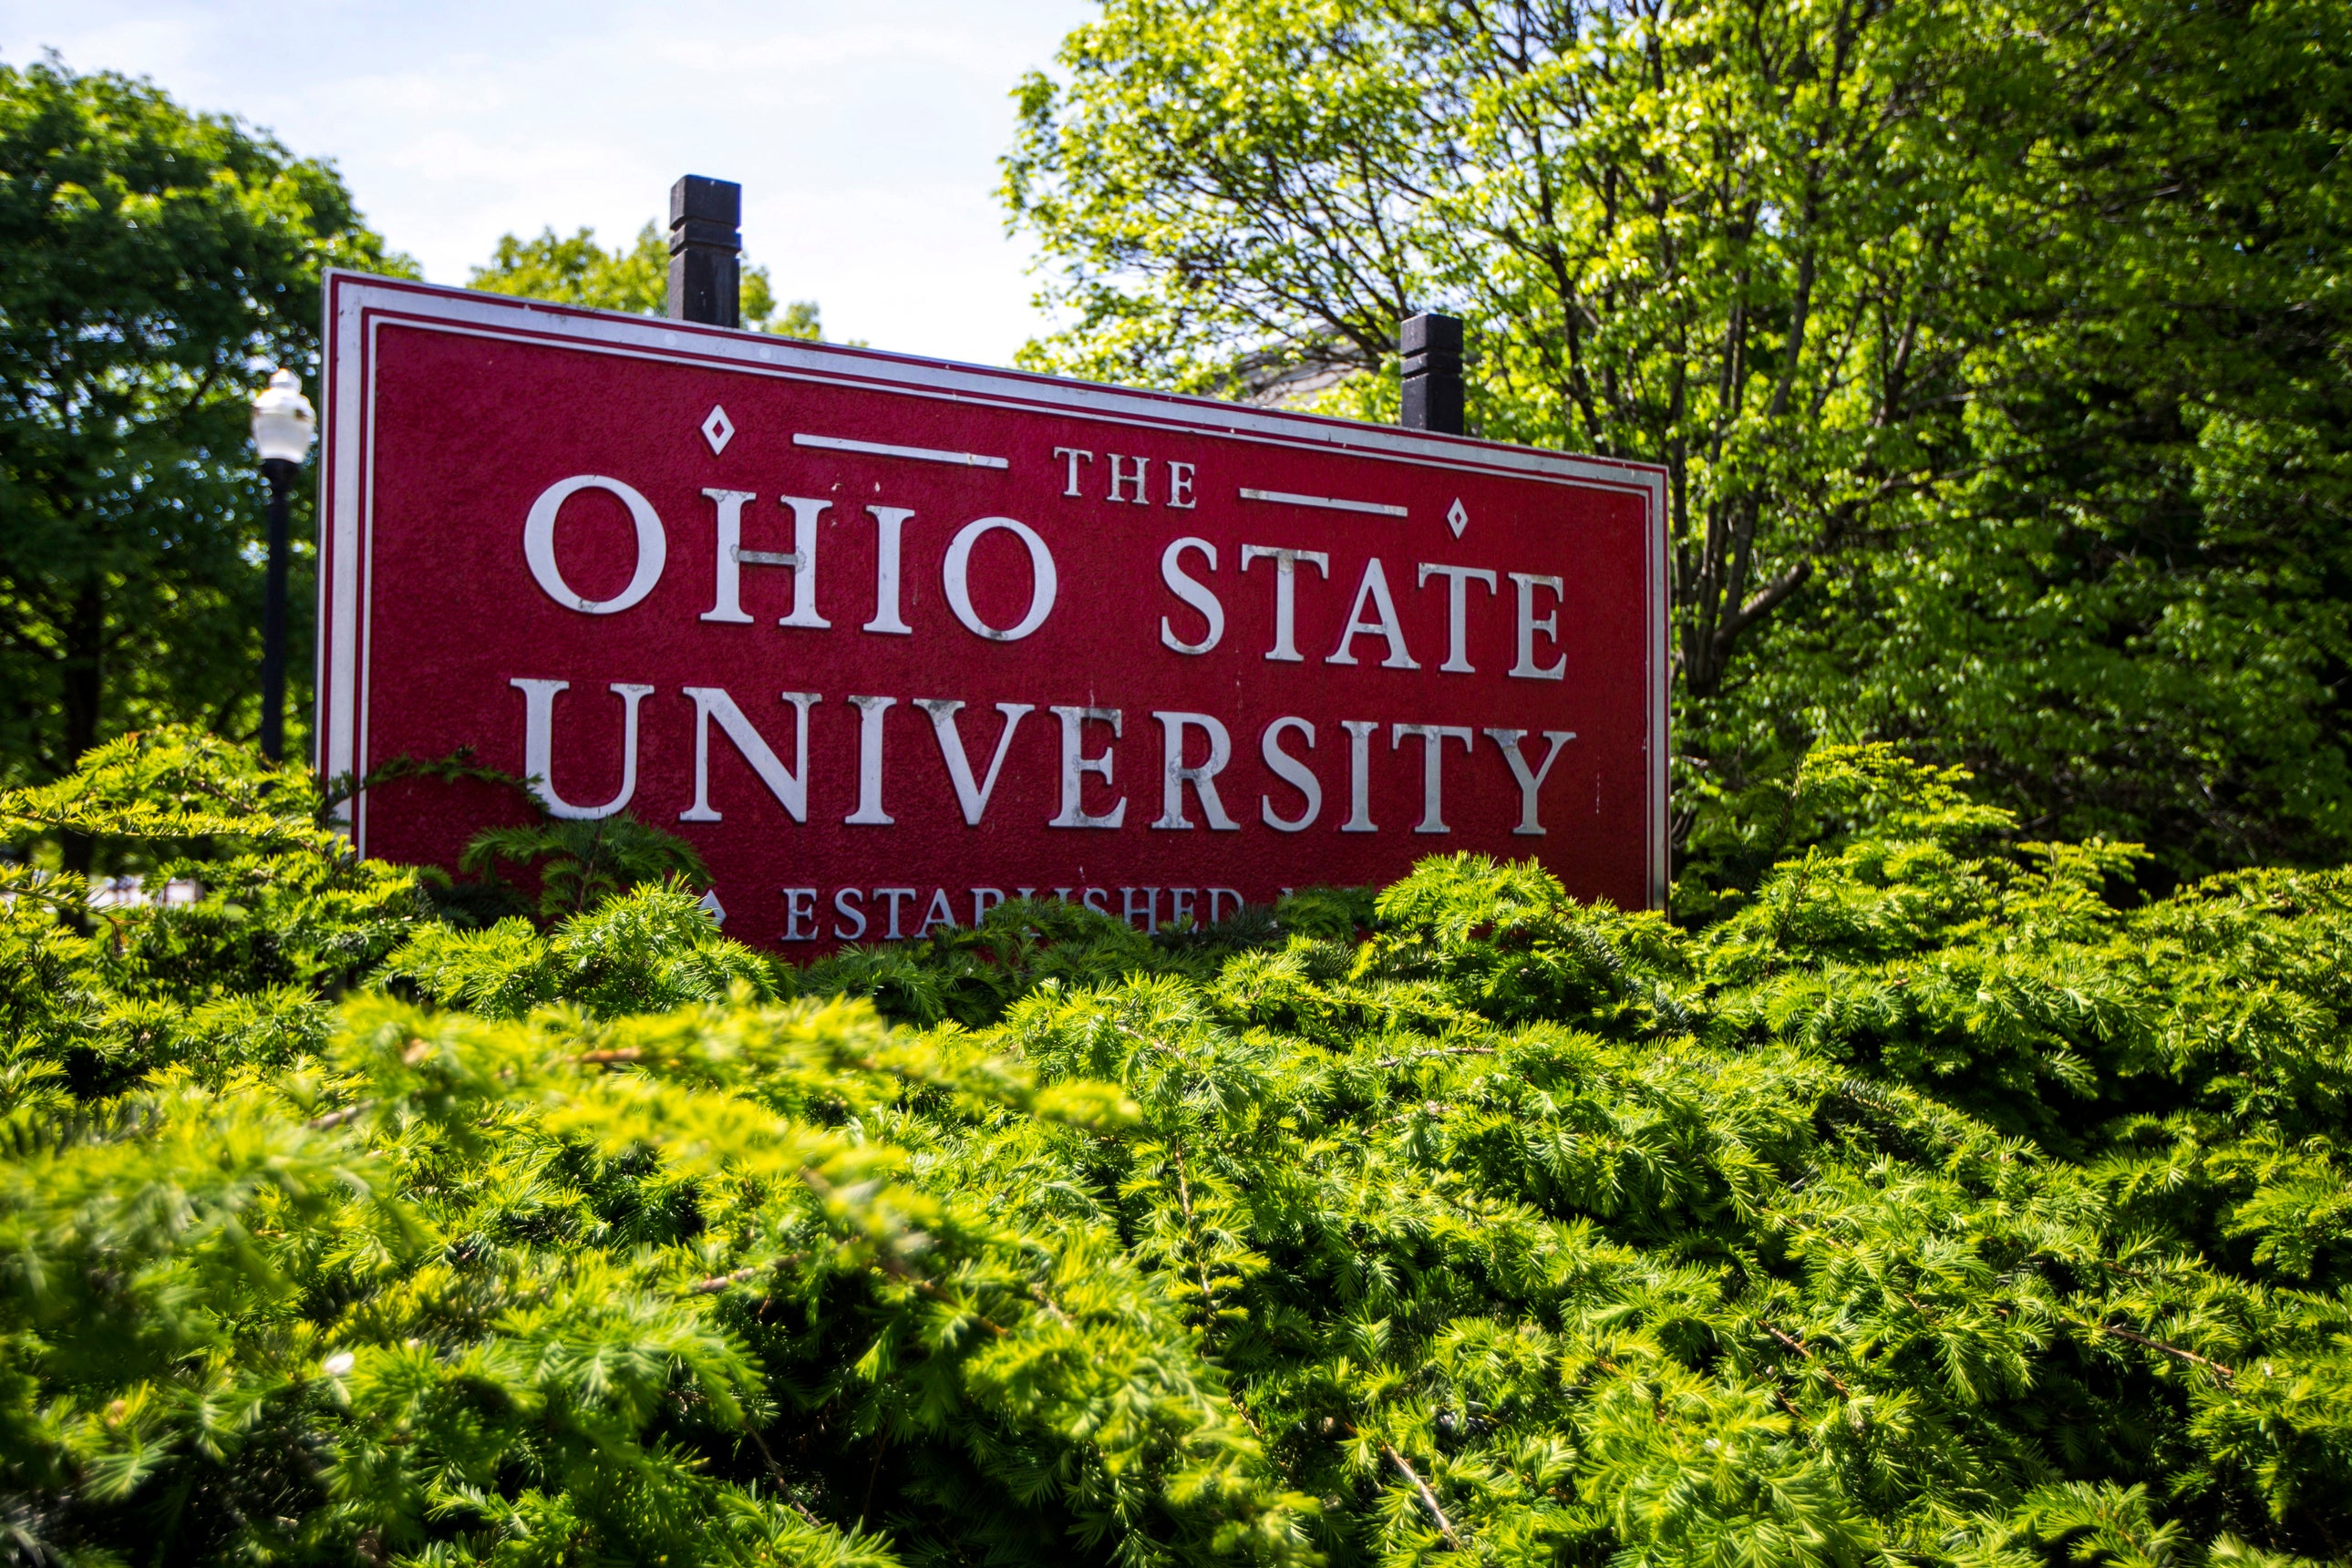 Two students died from an apparent overdose at Ohio State University